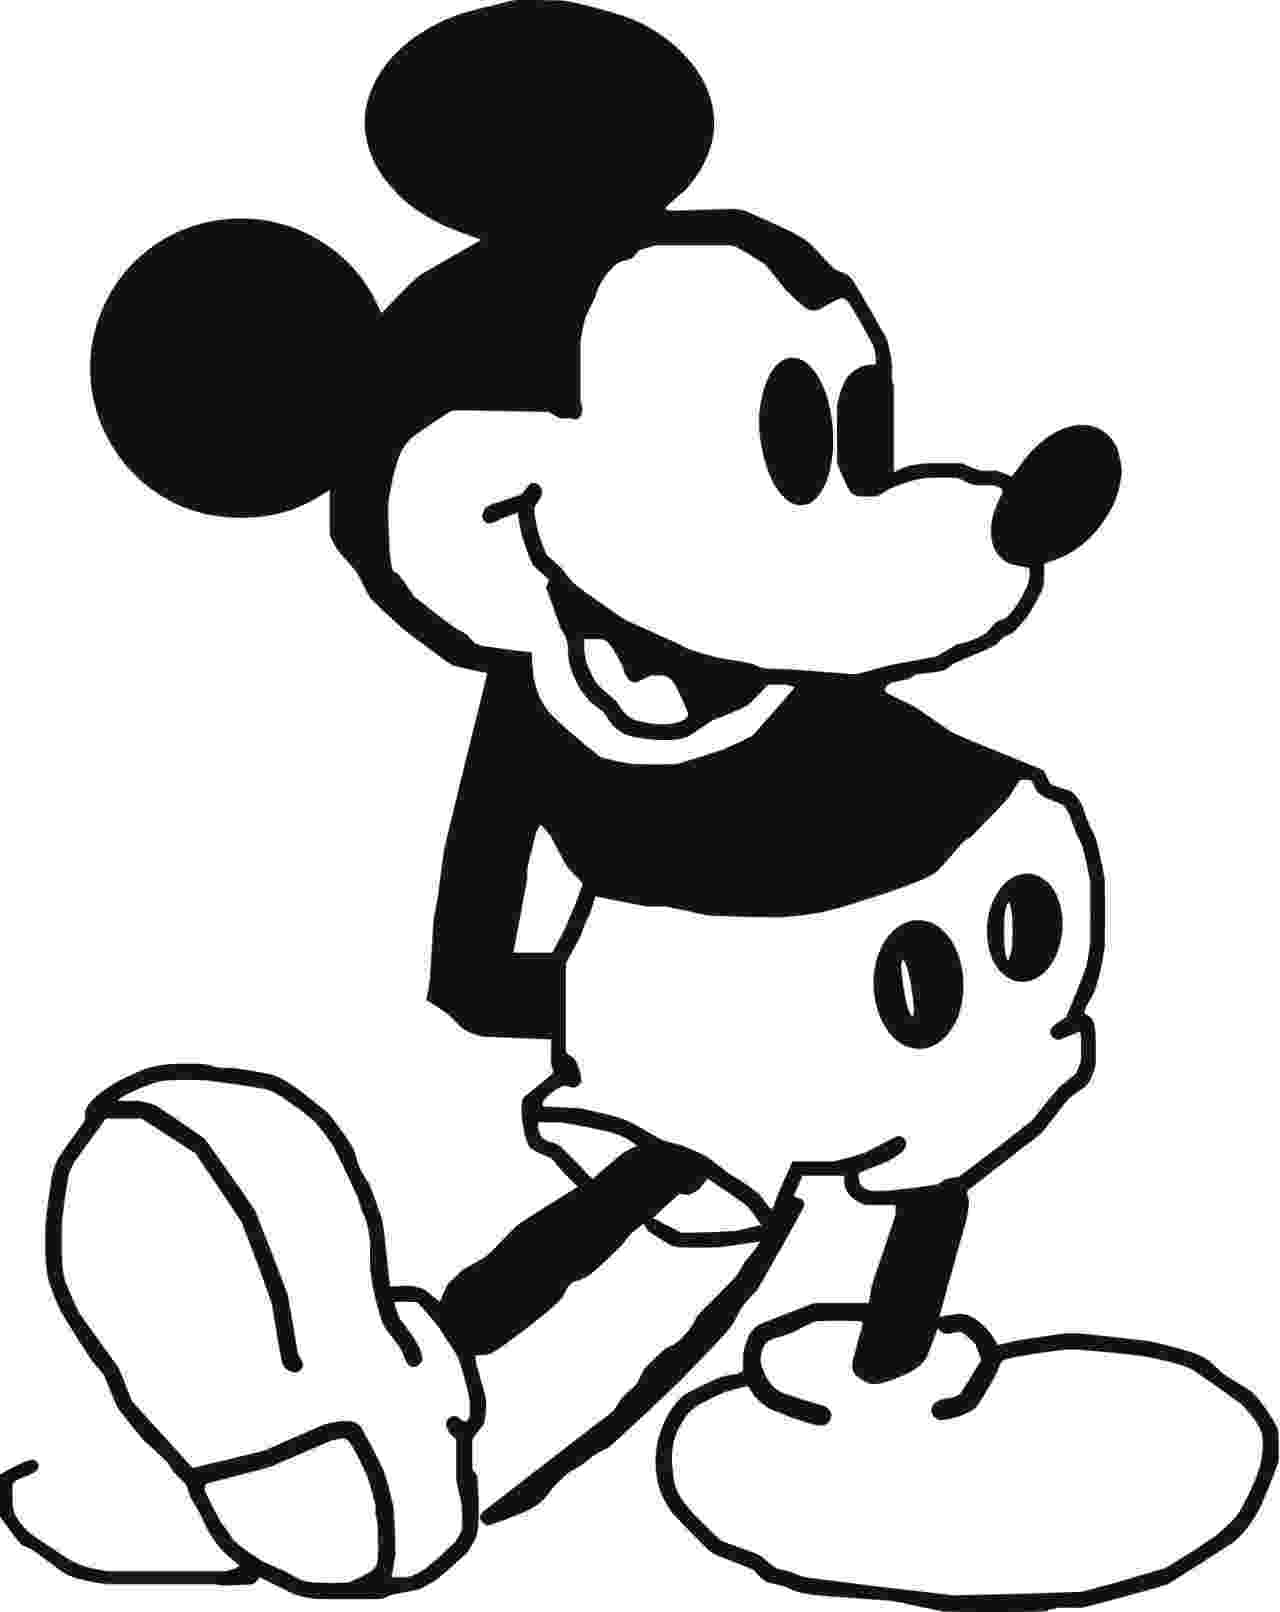 black and white pictures of mickey mouse mickey mouse black and white by stephen on deviantart png of mouse mickey black white pictures and 